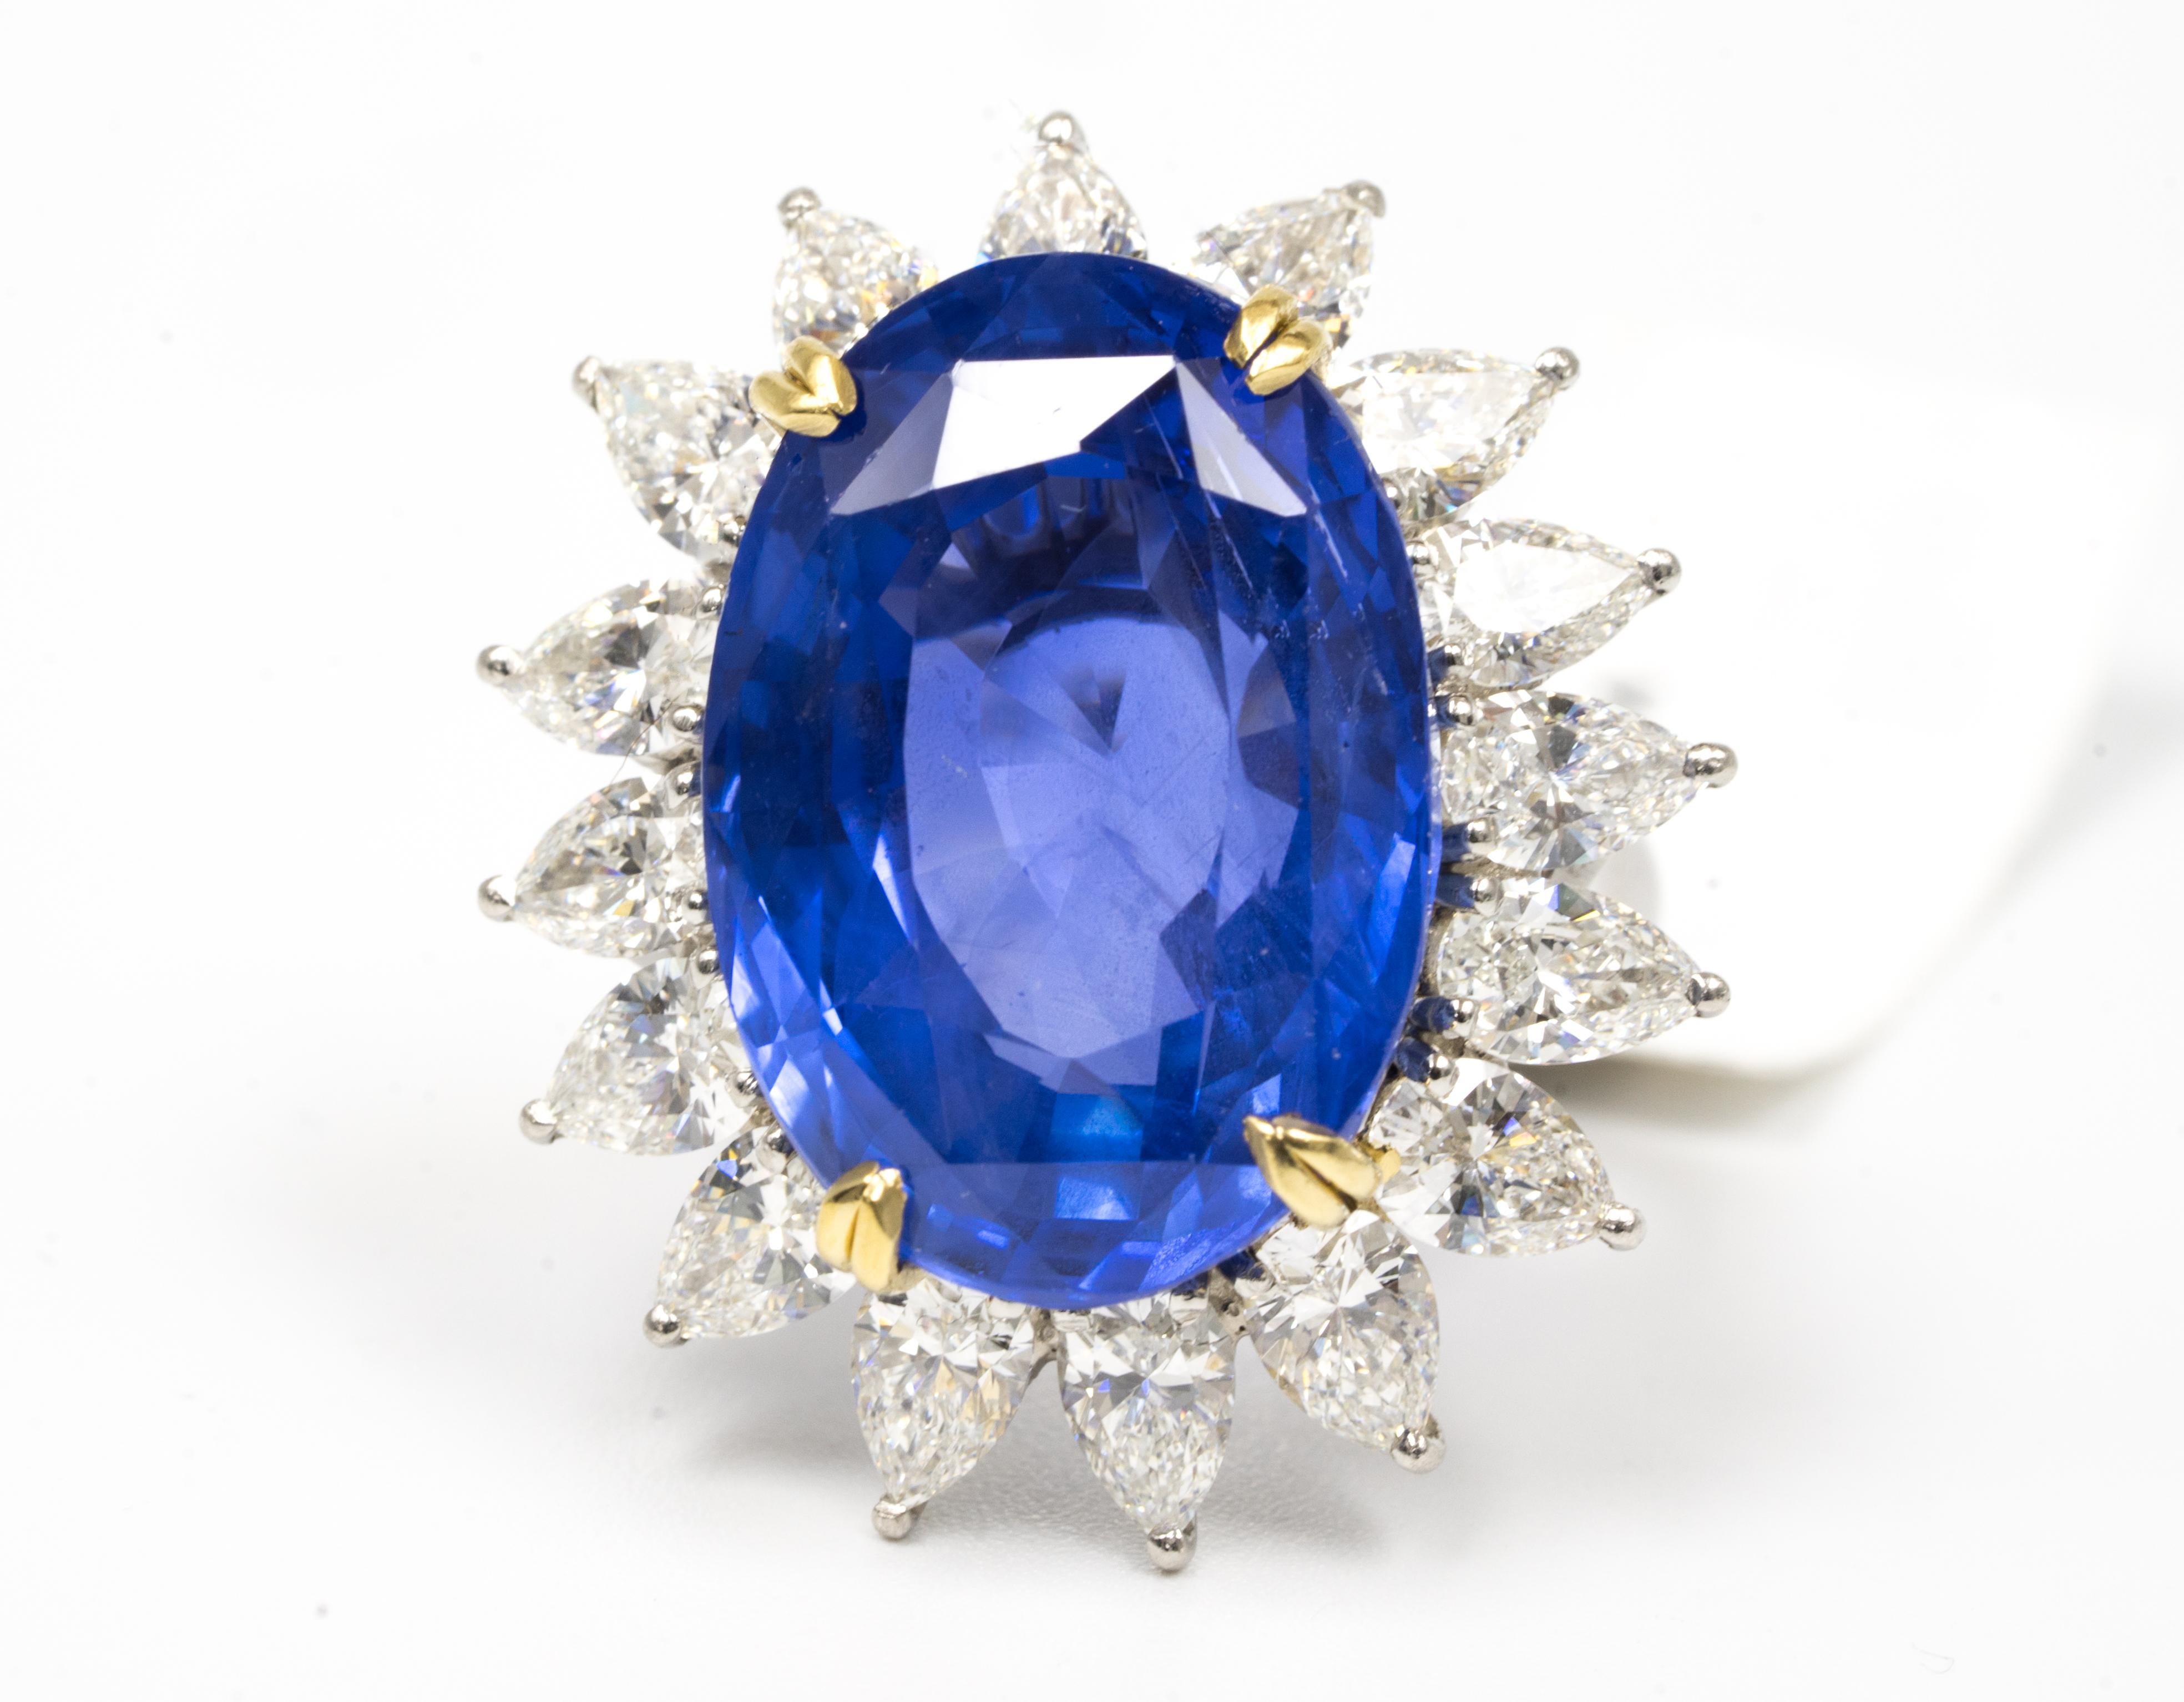 A Magnificent  33.64ct. Natural Unheated Sapphire and diamond ring in 18k Yellow Gold & Platinum, surrounded by 16 Pear shape diamonds with a total weight of approx 5.50 carats.  

Accompanying GIA Grading report number 1152924208.


